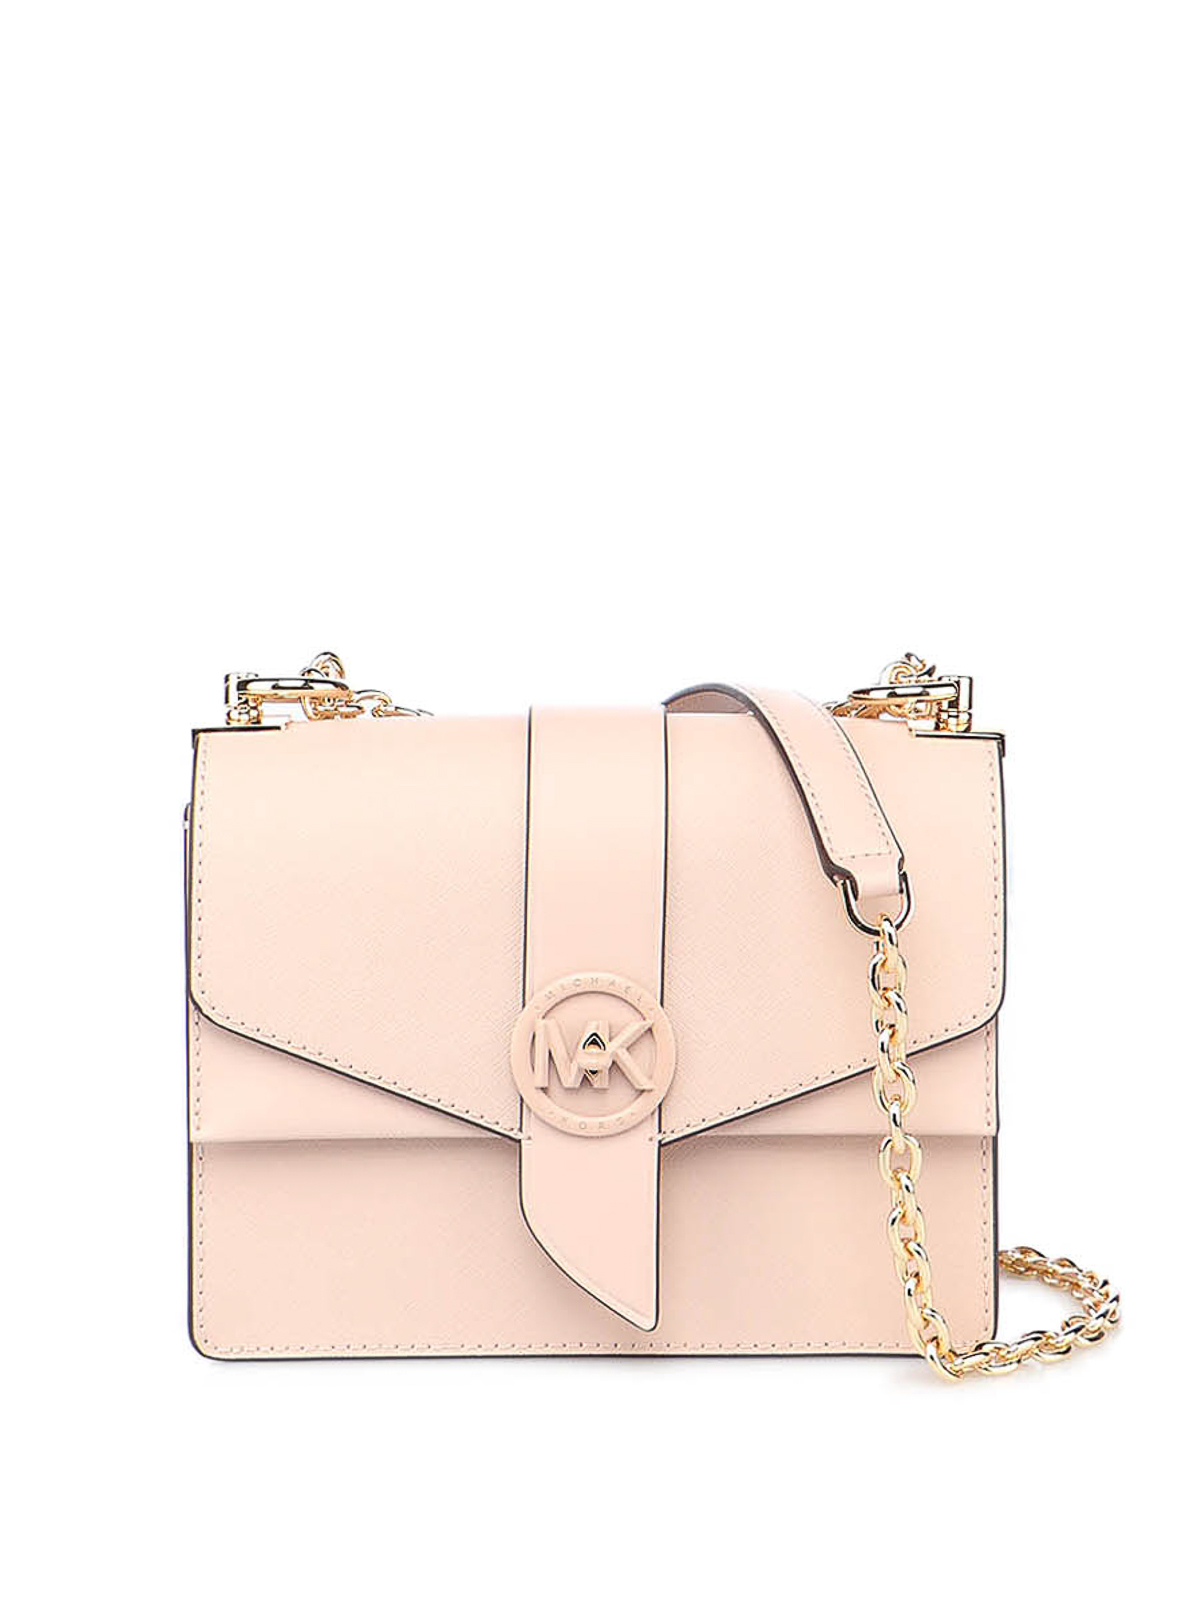 Buy Michael Kors Greenwich Small Saffiano Leather Bag - Neutrals